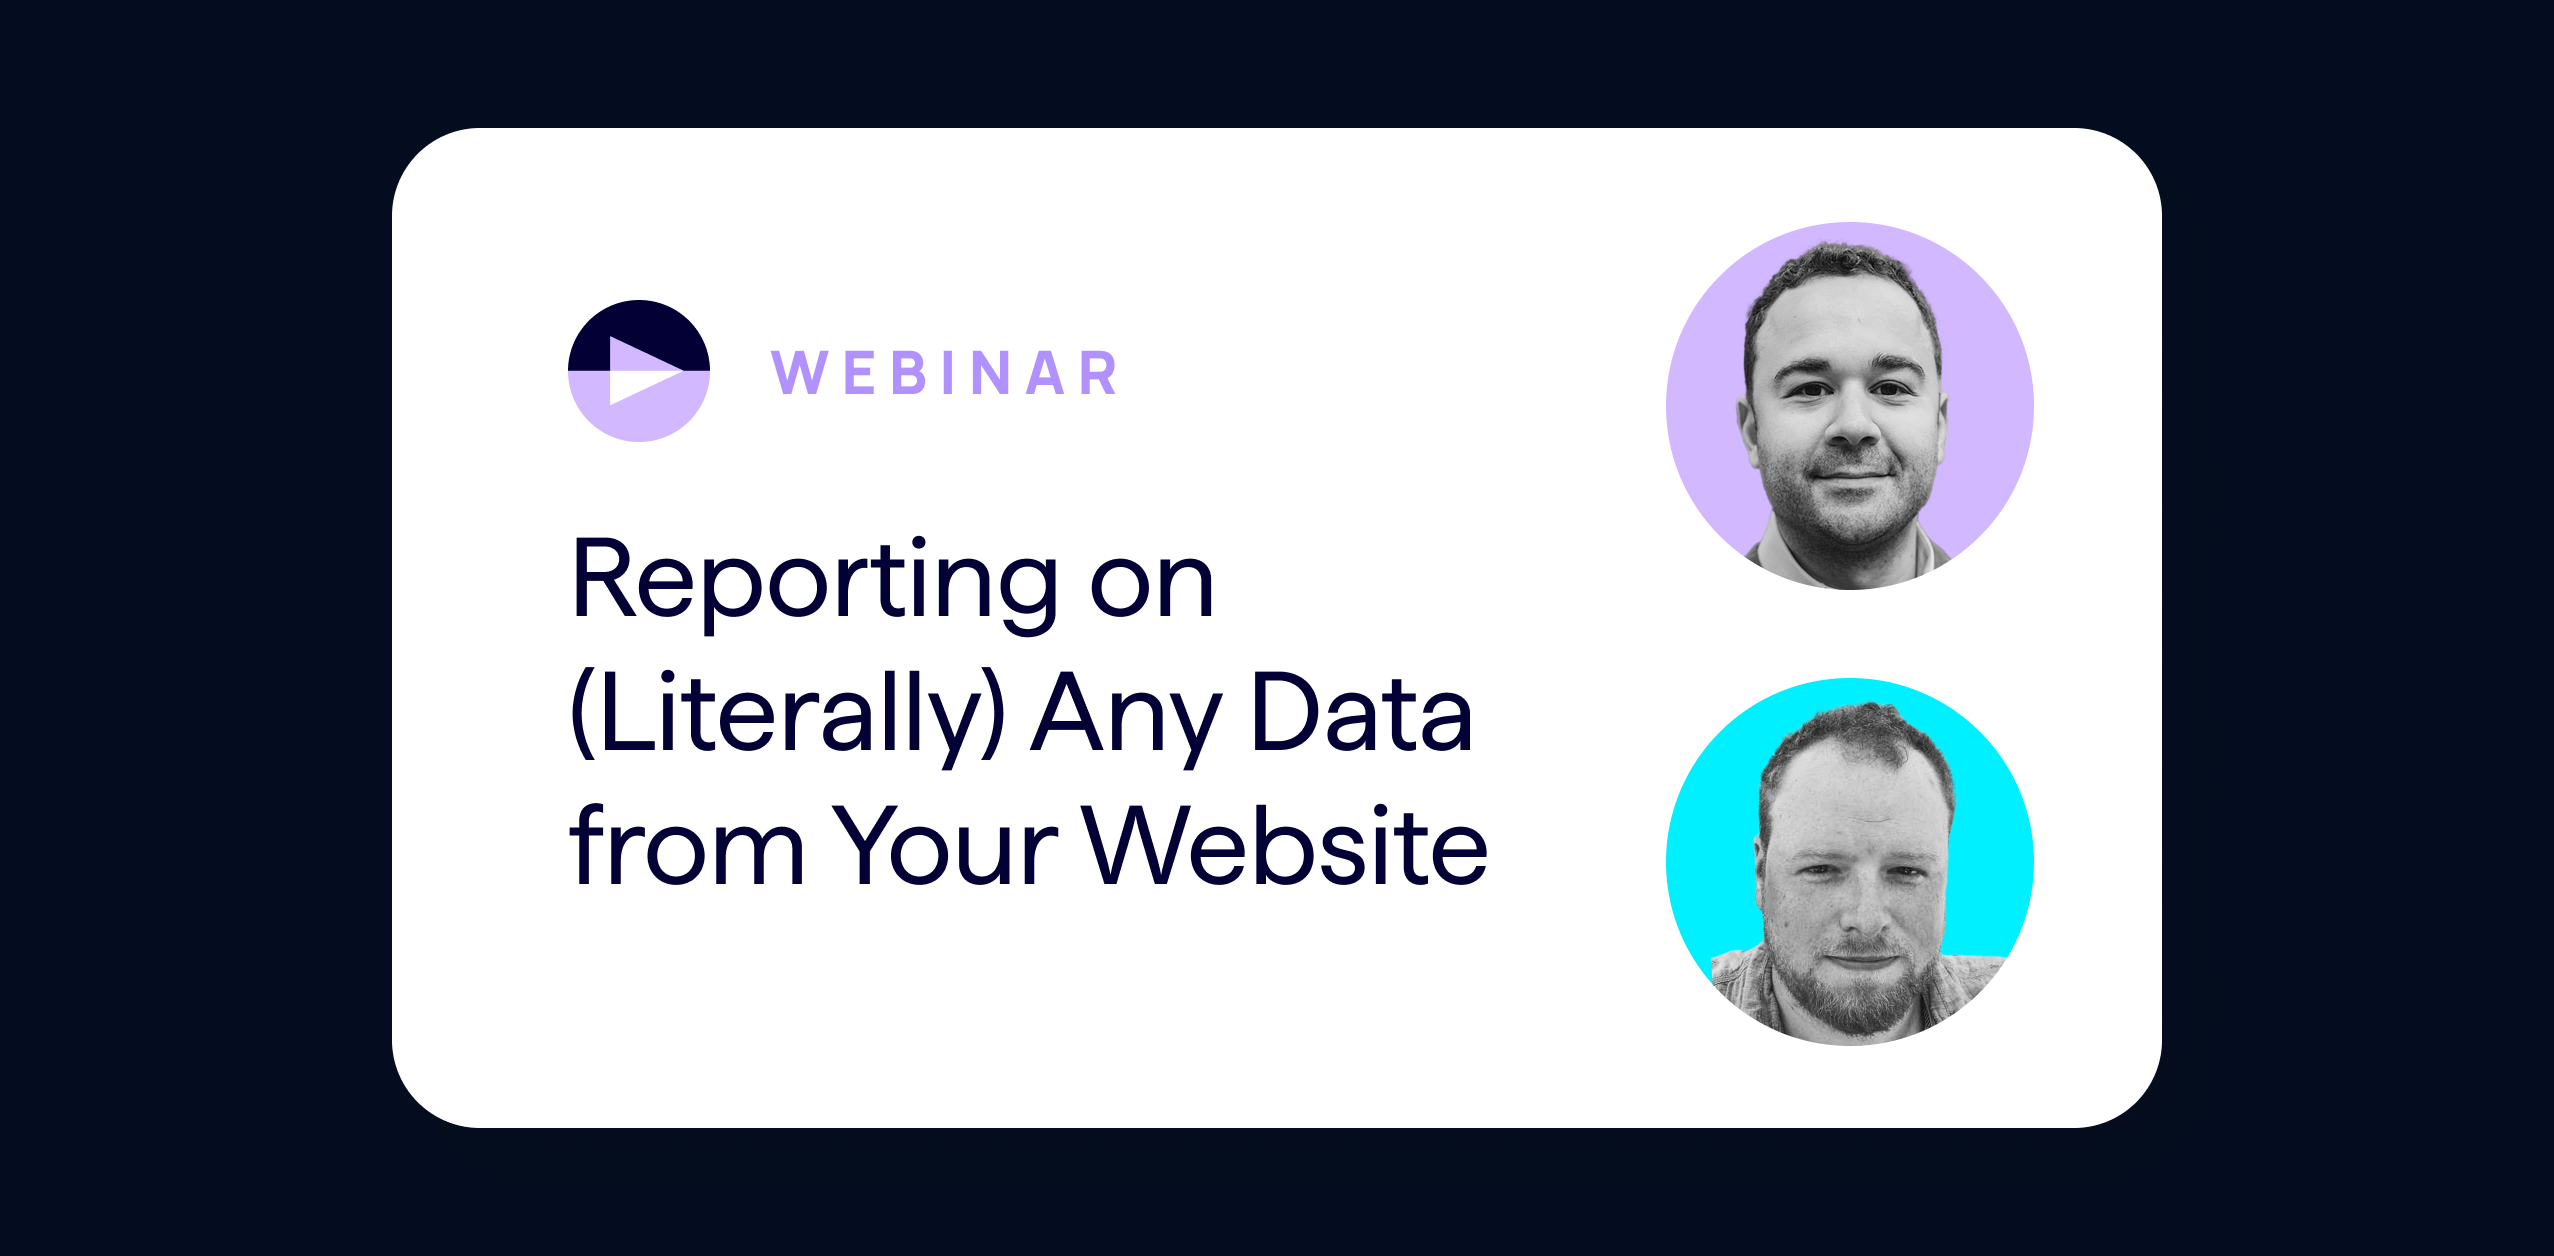 Lumar Webinar Cover Image - Reporting on Any Data From Your Website